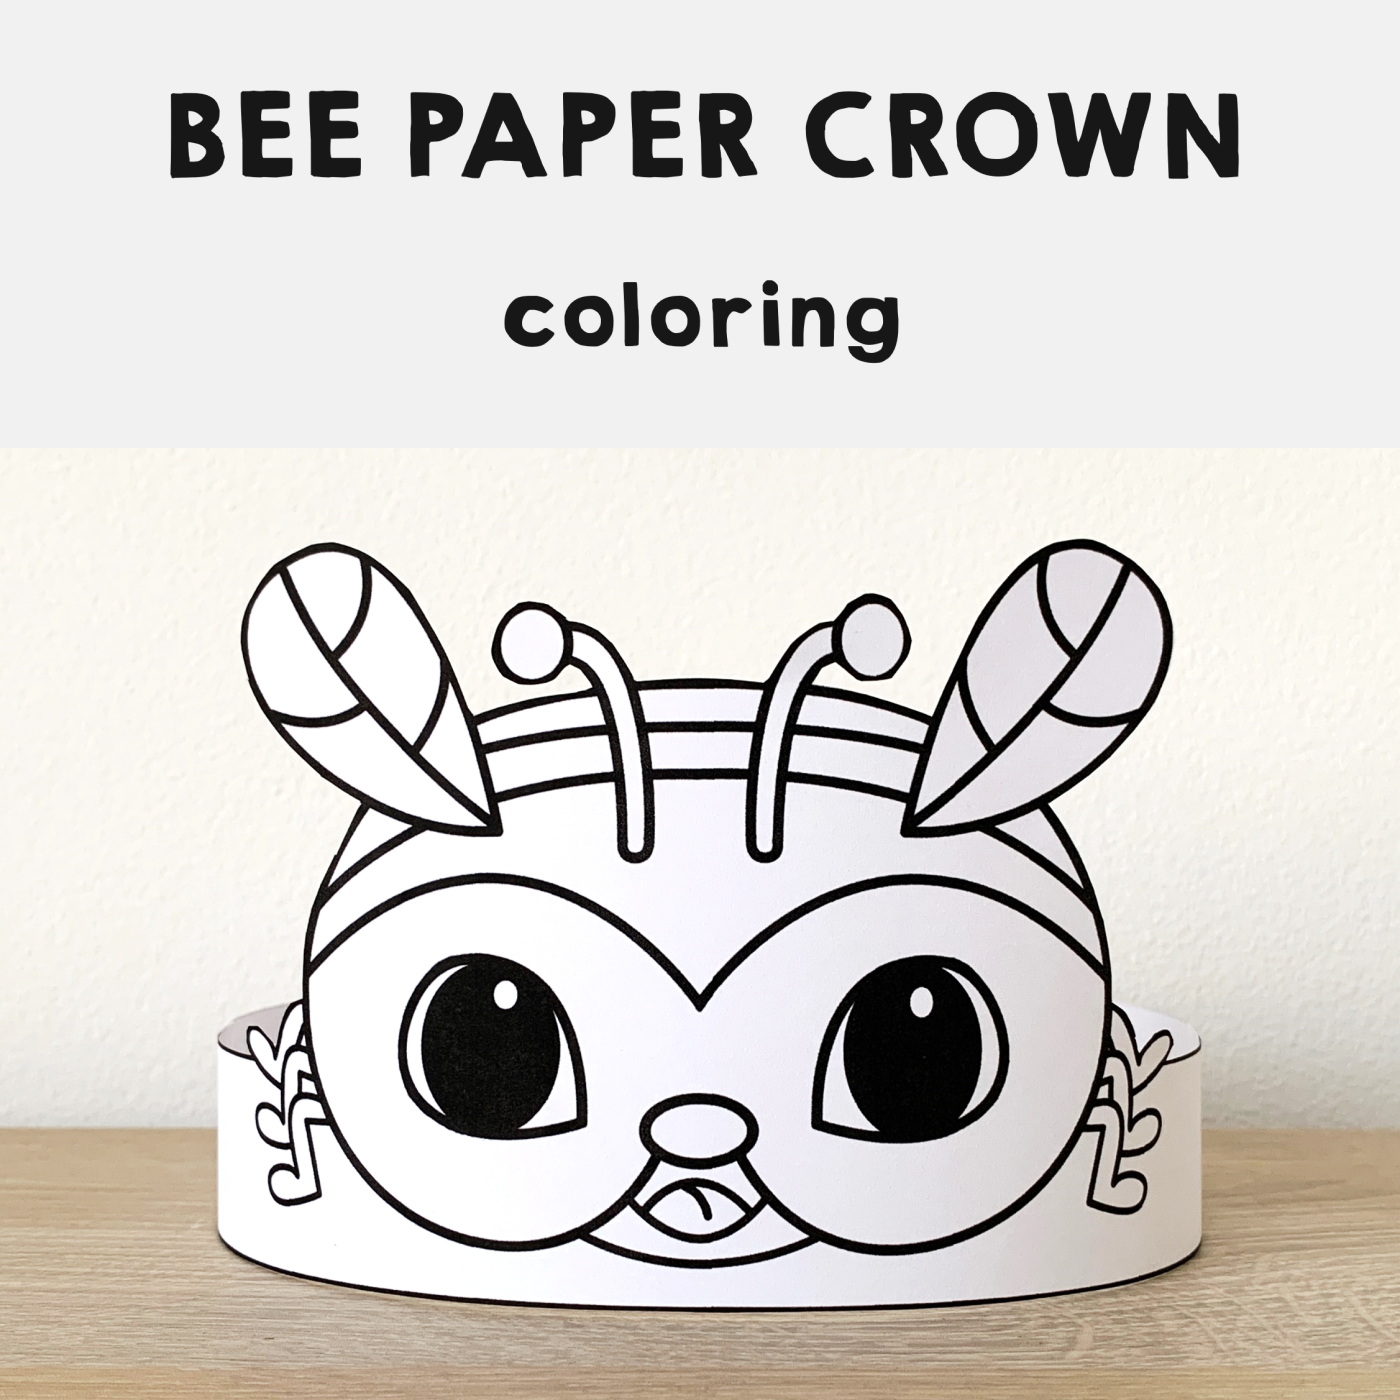 Bee paper crown printable coloring craft made by teachers